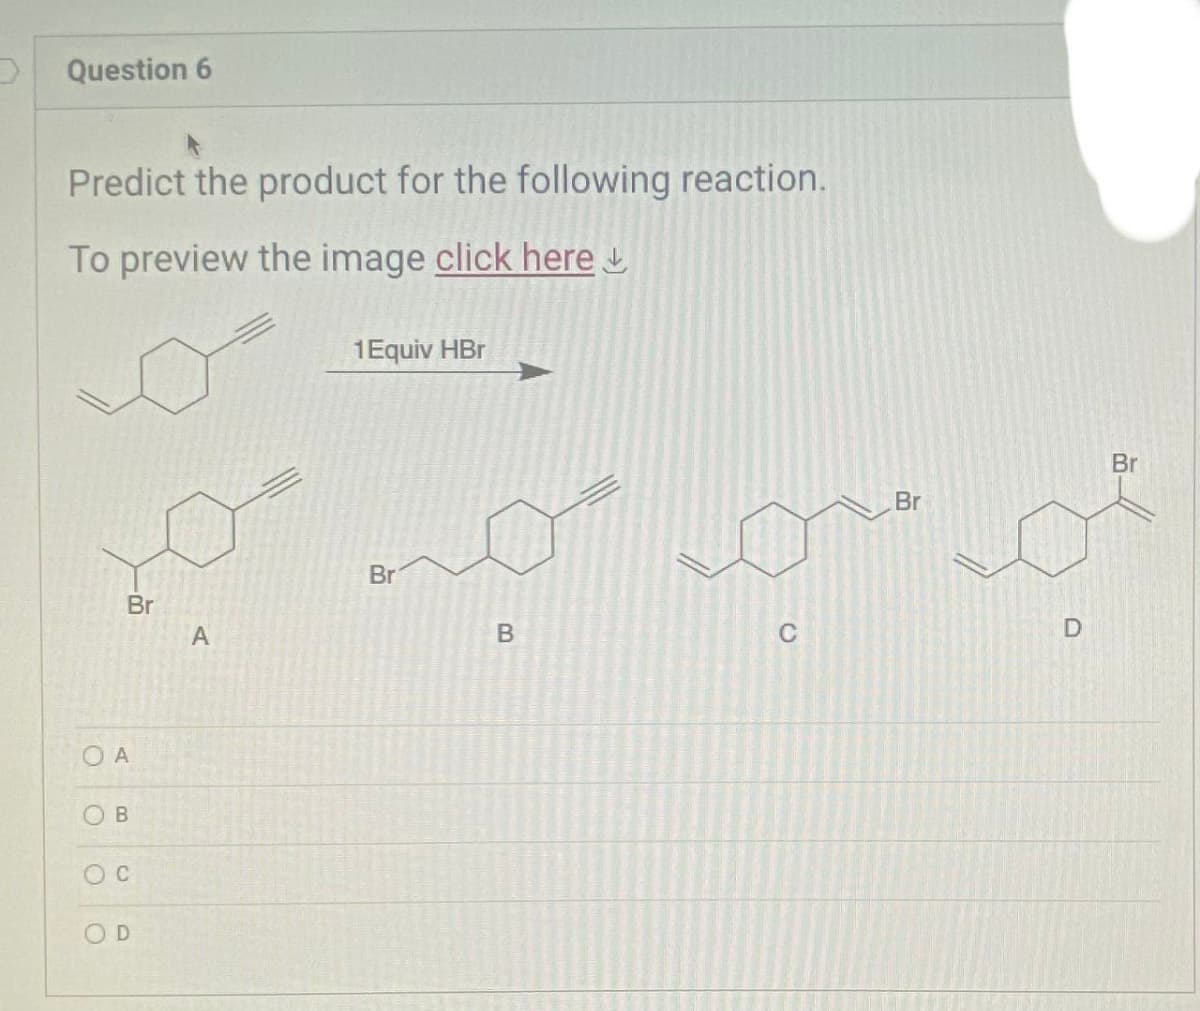 Question 6
Predict the product for the following reaction.
To preview the image click here
Br
O A
OB
D
A
1 Equiv HBr
Br
B
Br
oo
C
Br
D